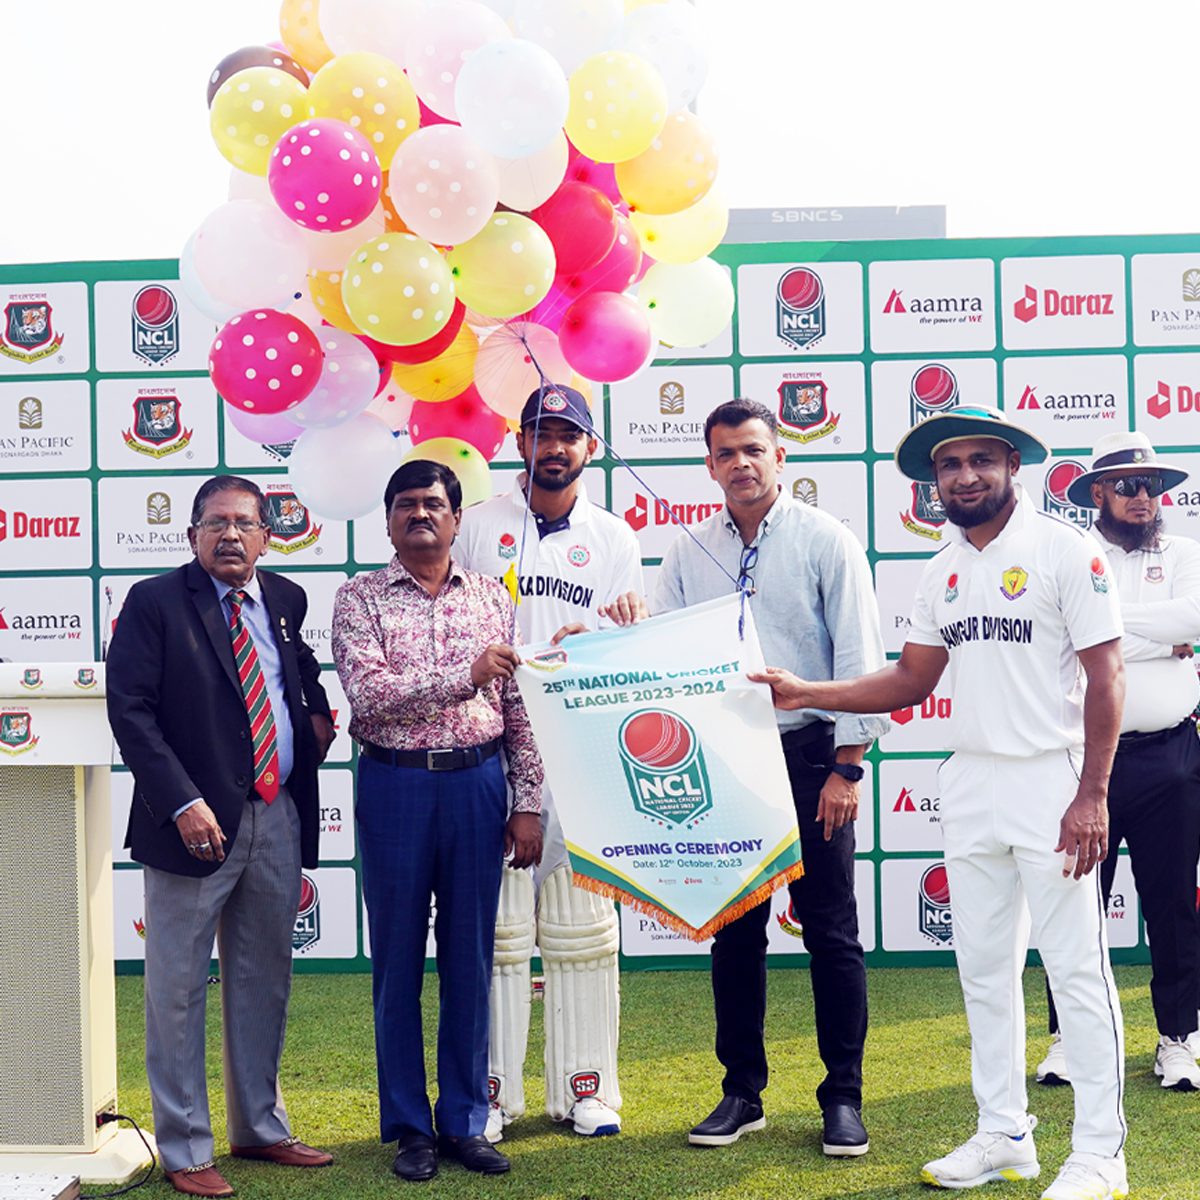 Opening Ceremony of 25th National Cricket League (NCL) 2023-2024 at SBNCS (12-10-2023)